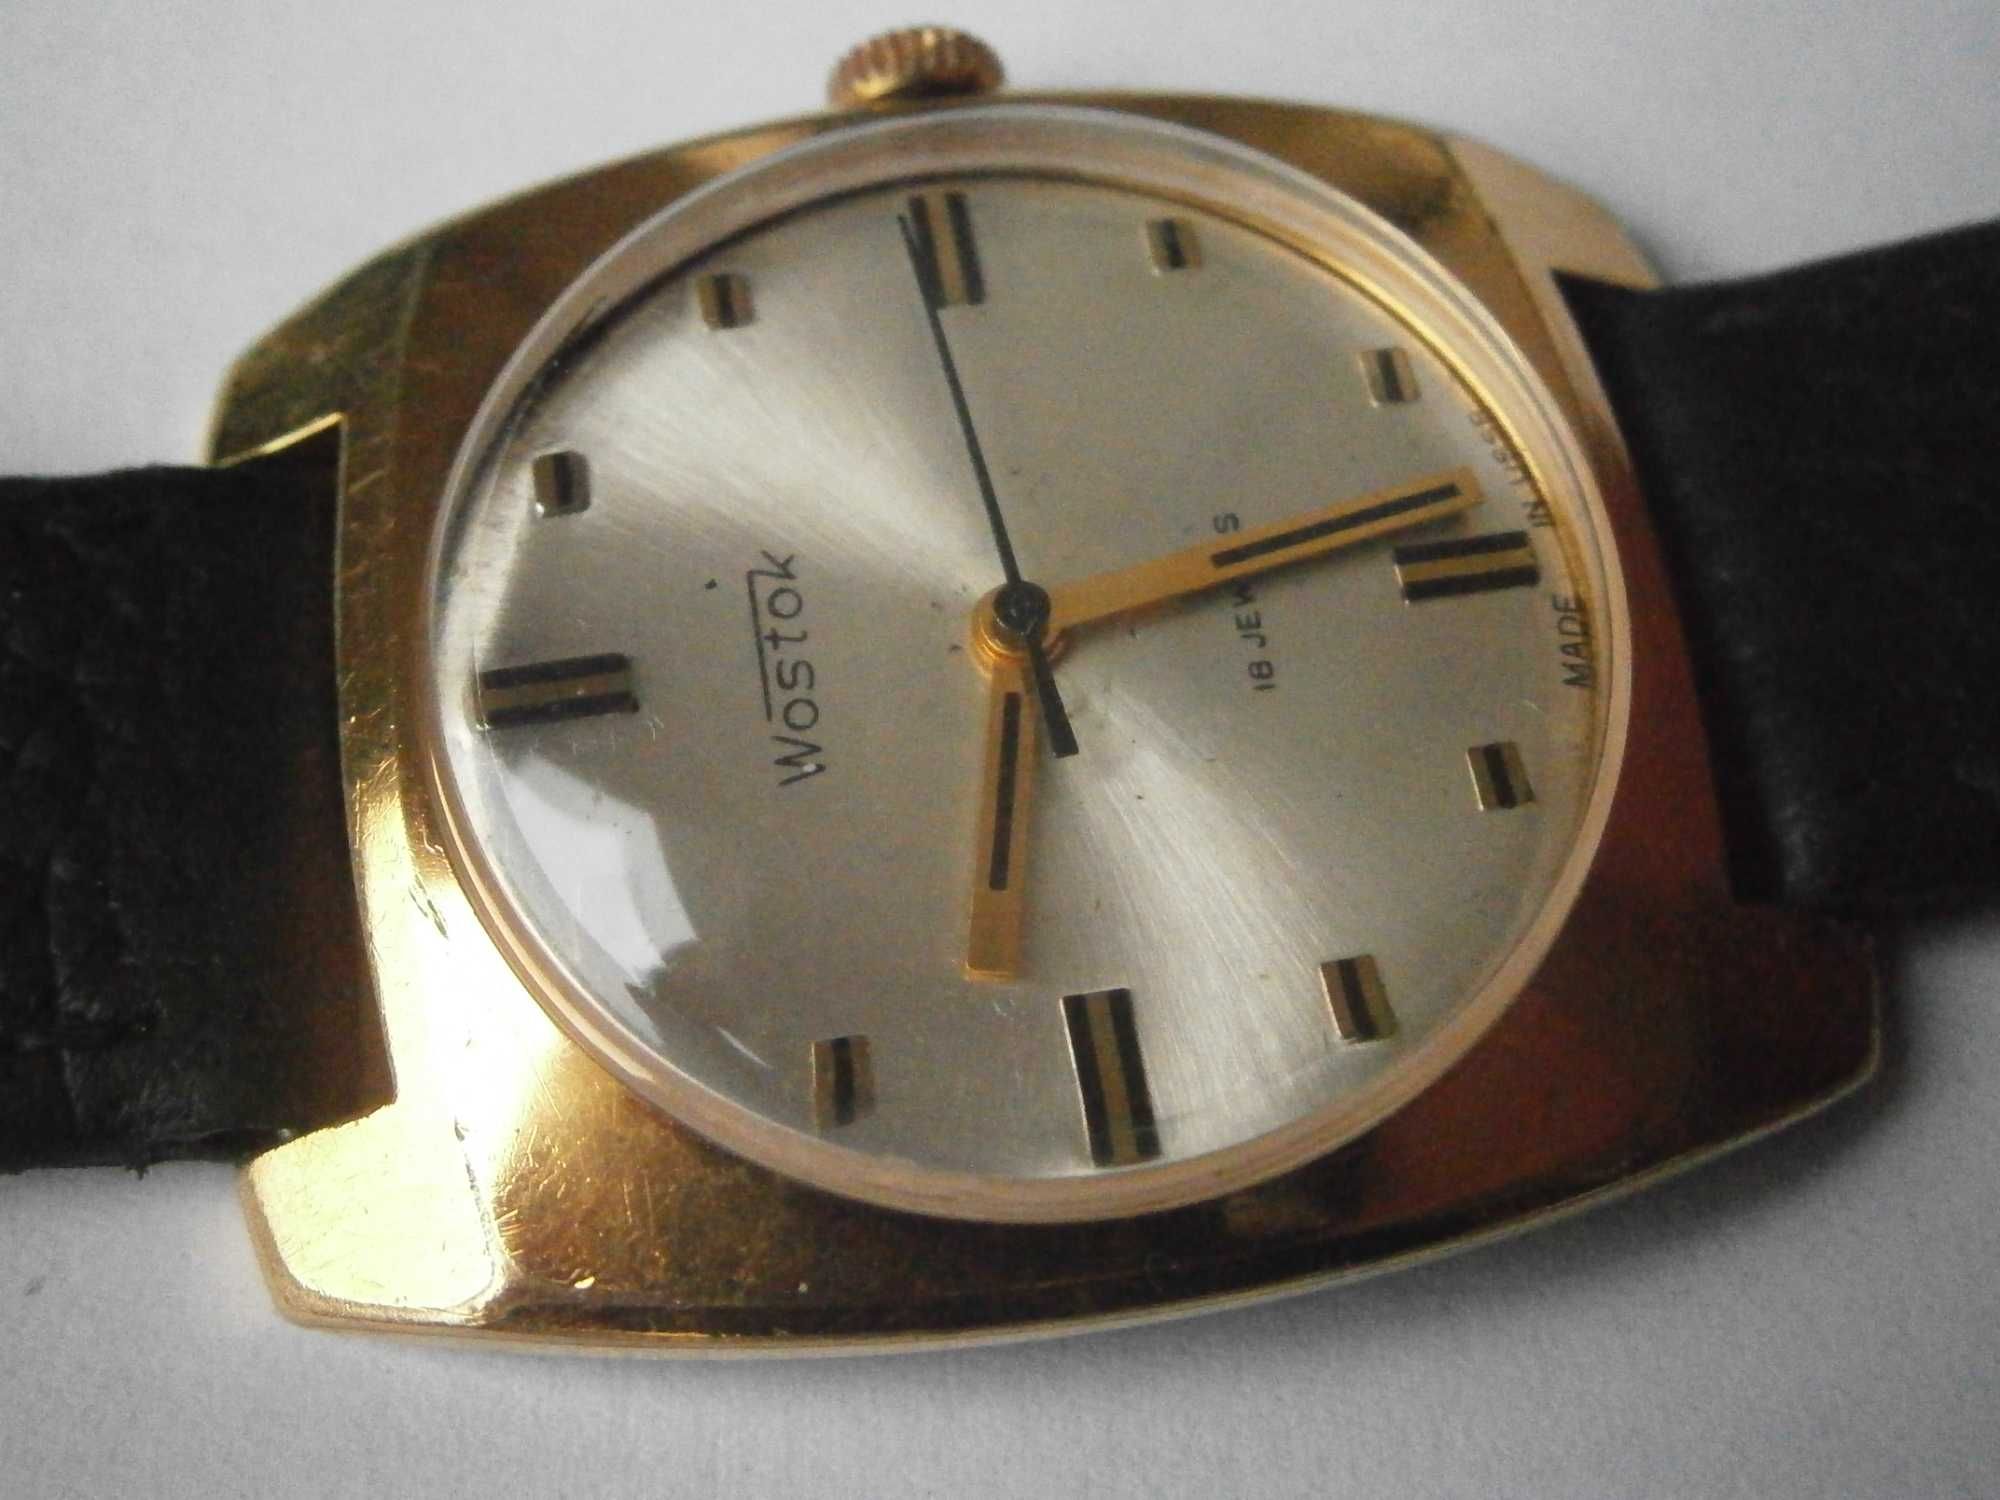 WOSTOK, 18 jewels, made in USSR, cal. 2209, TOP!